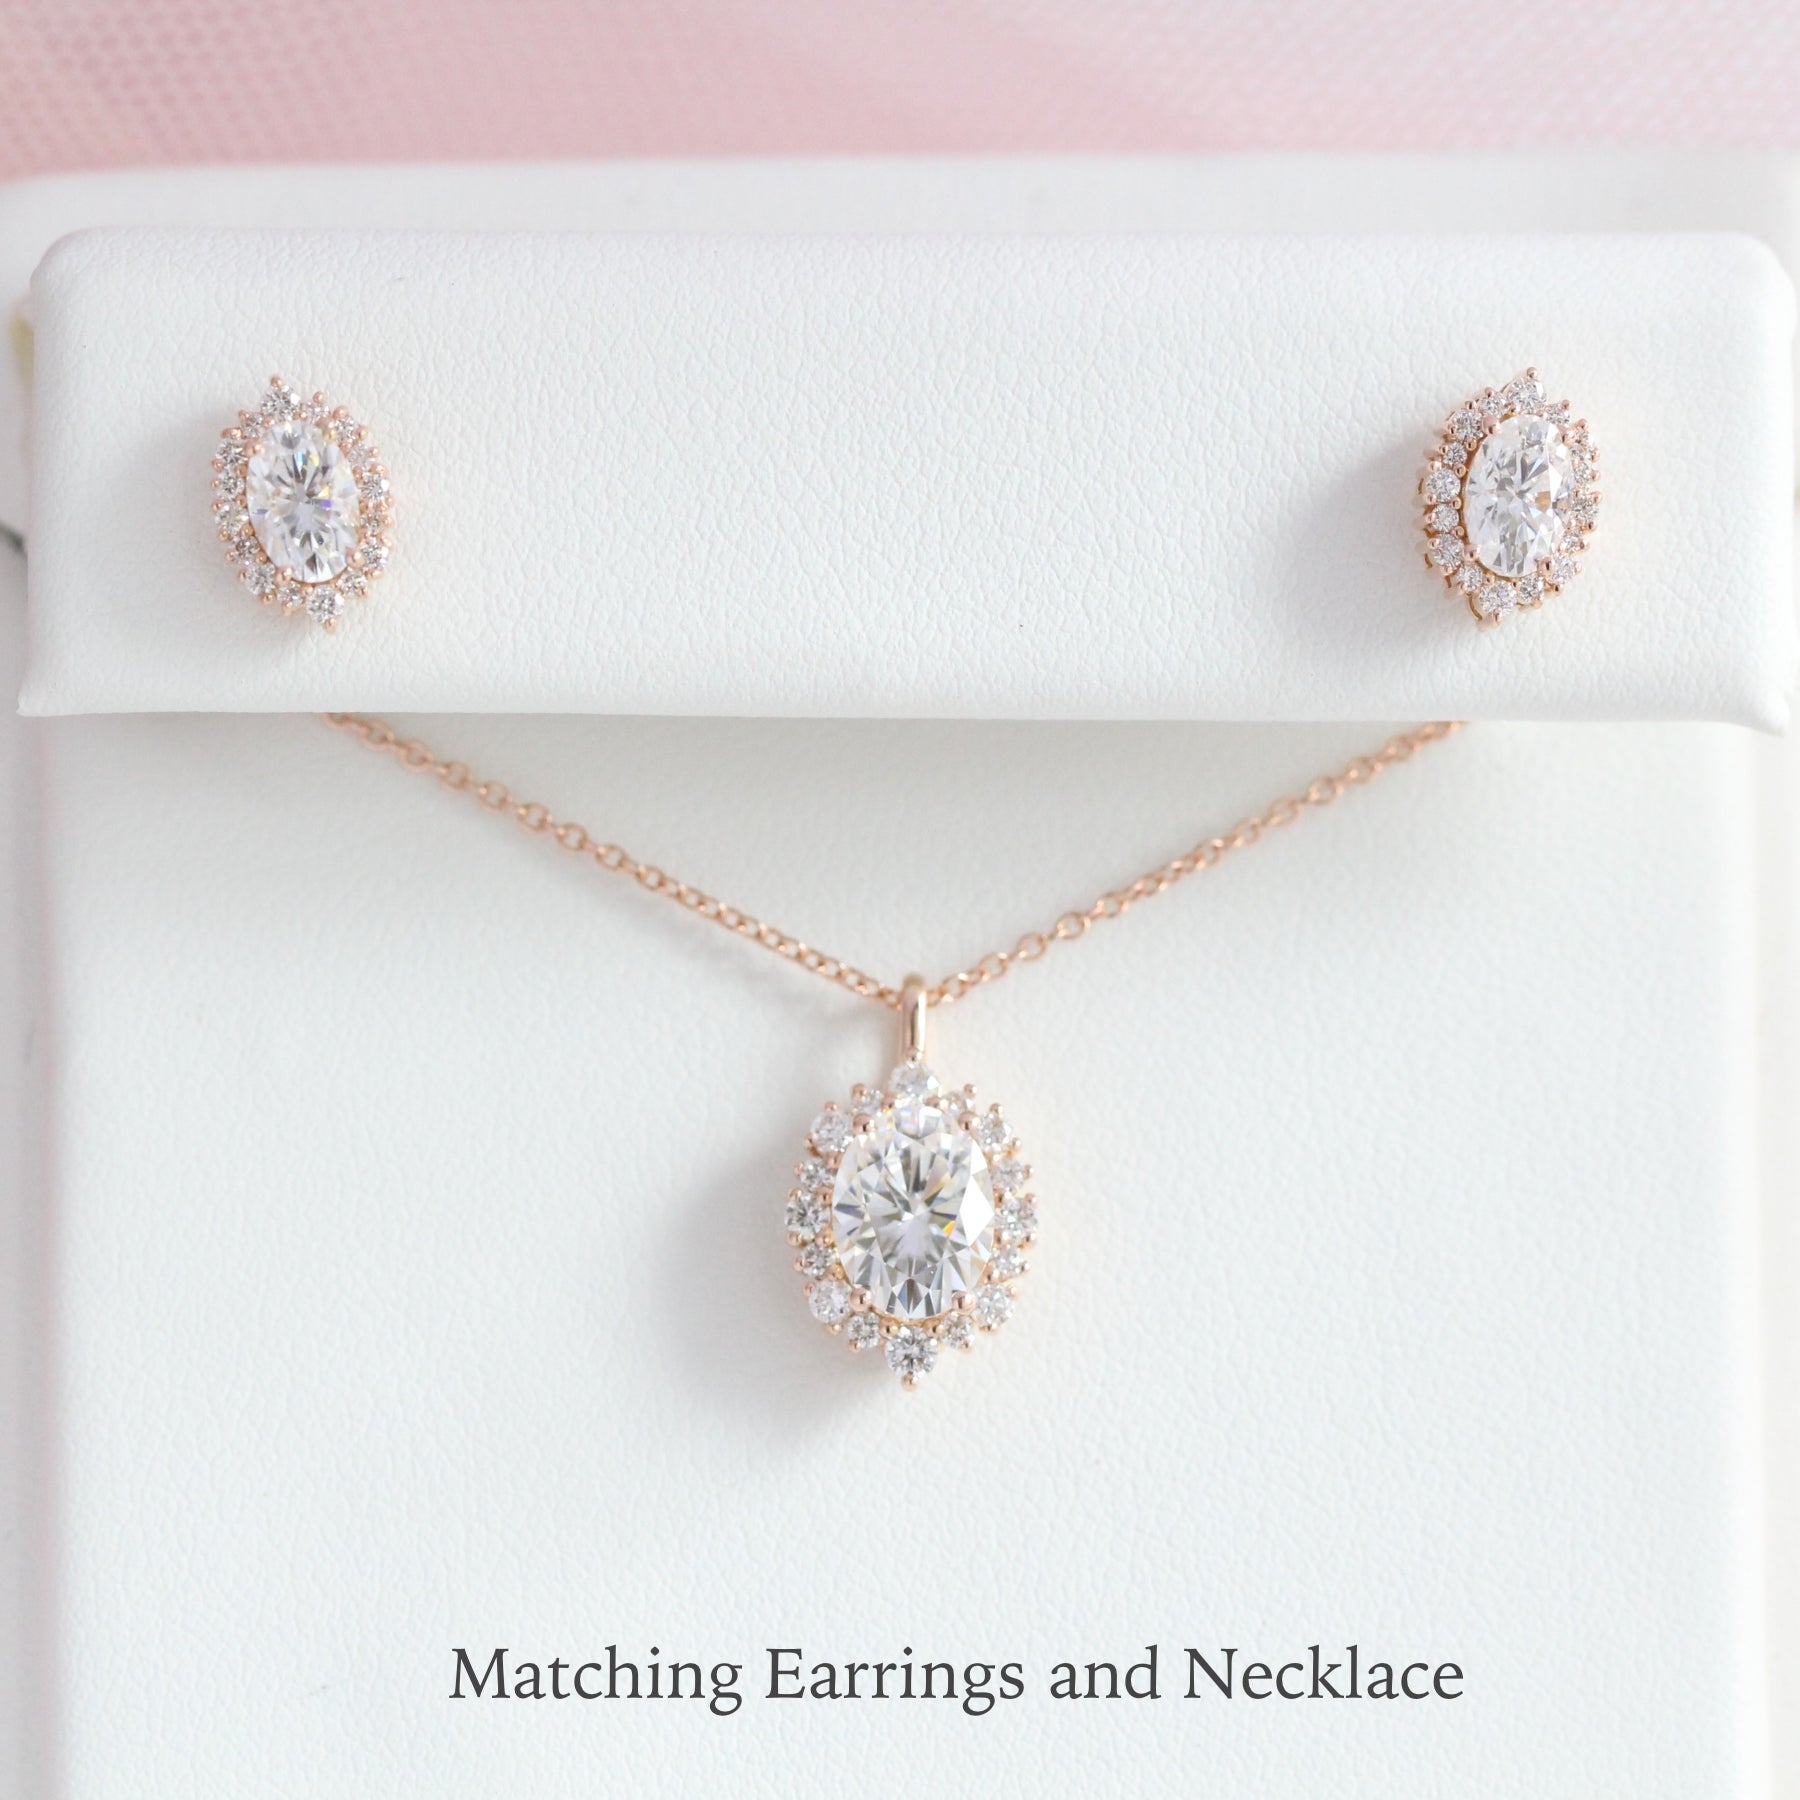 Matching Diamond Earrings and Necklace Rose Gold Wedding Jewelry Set La More Design JEWELRY